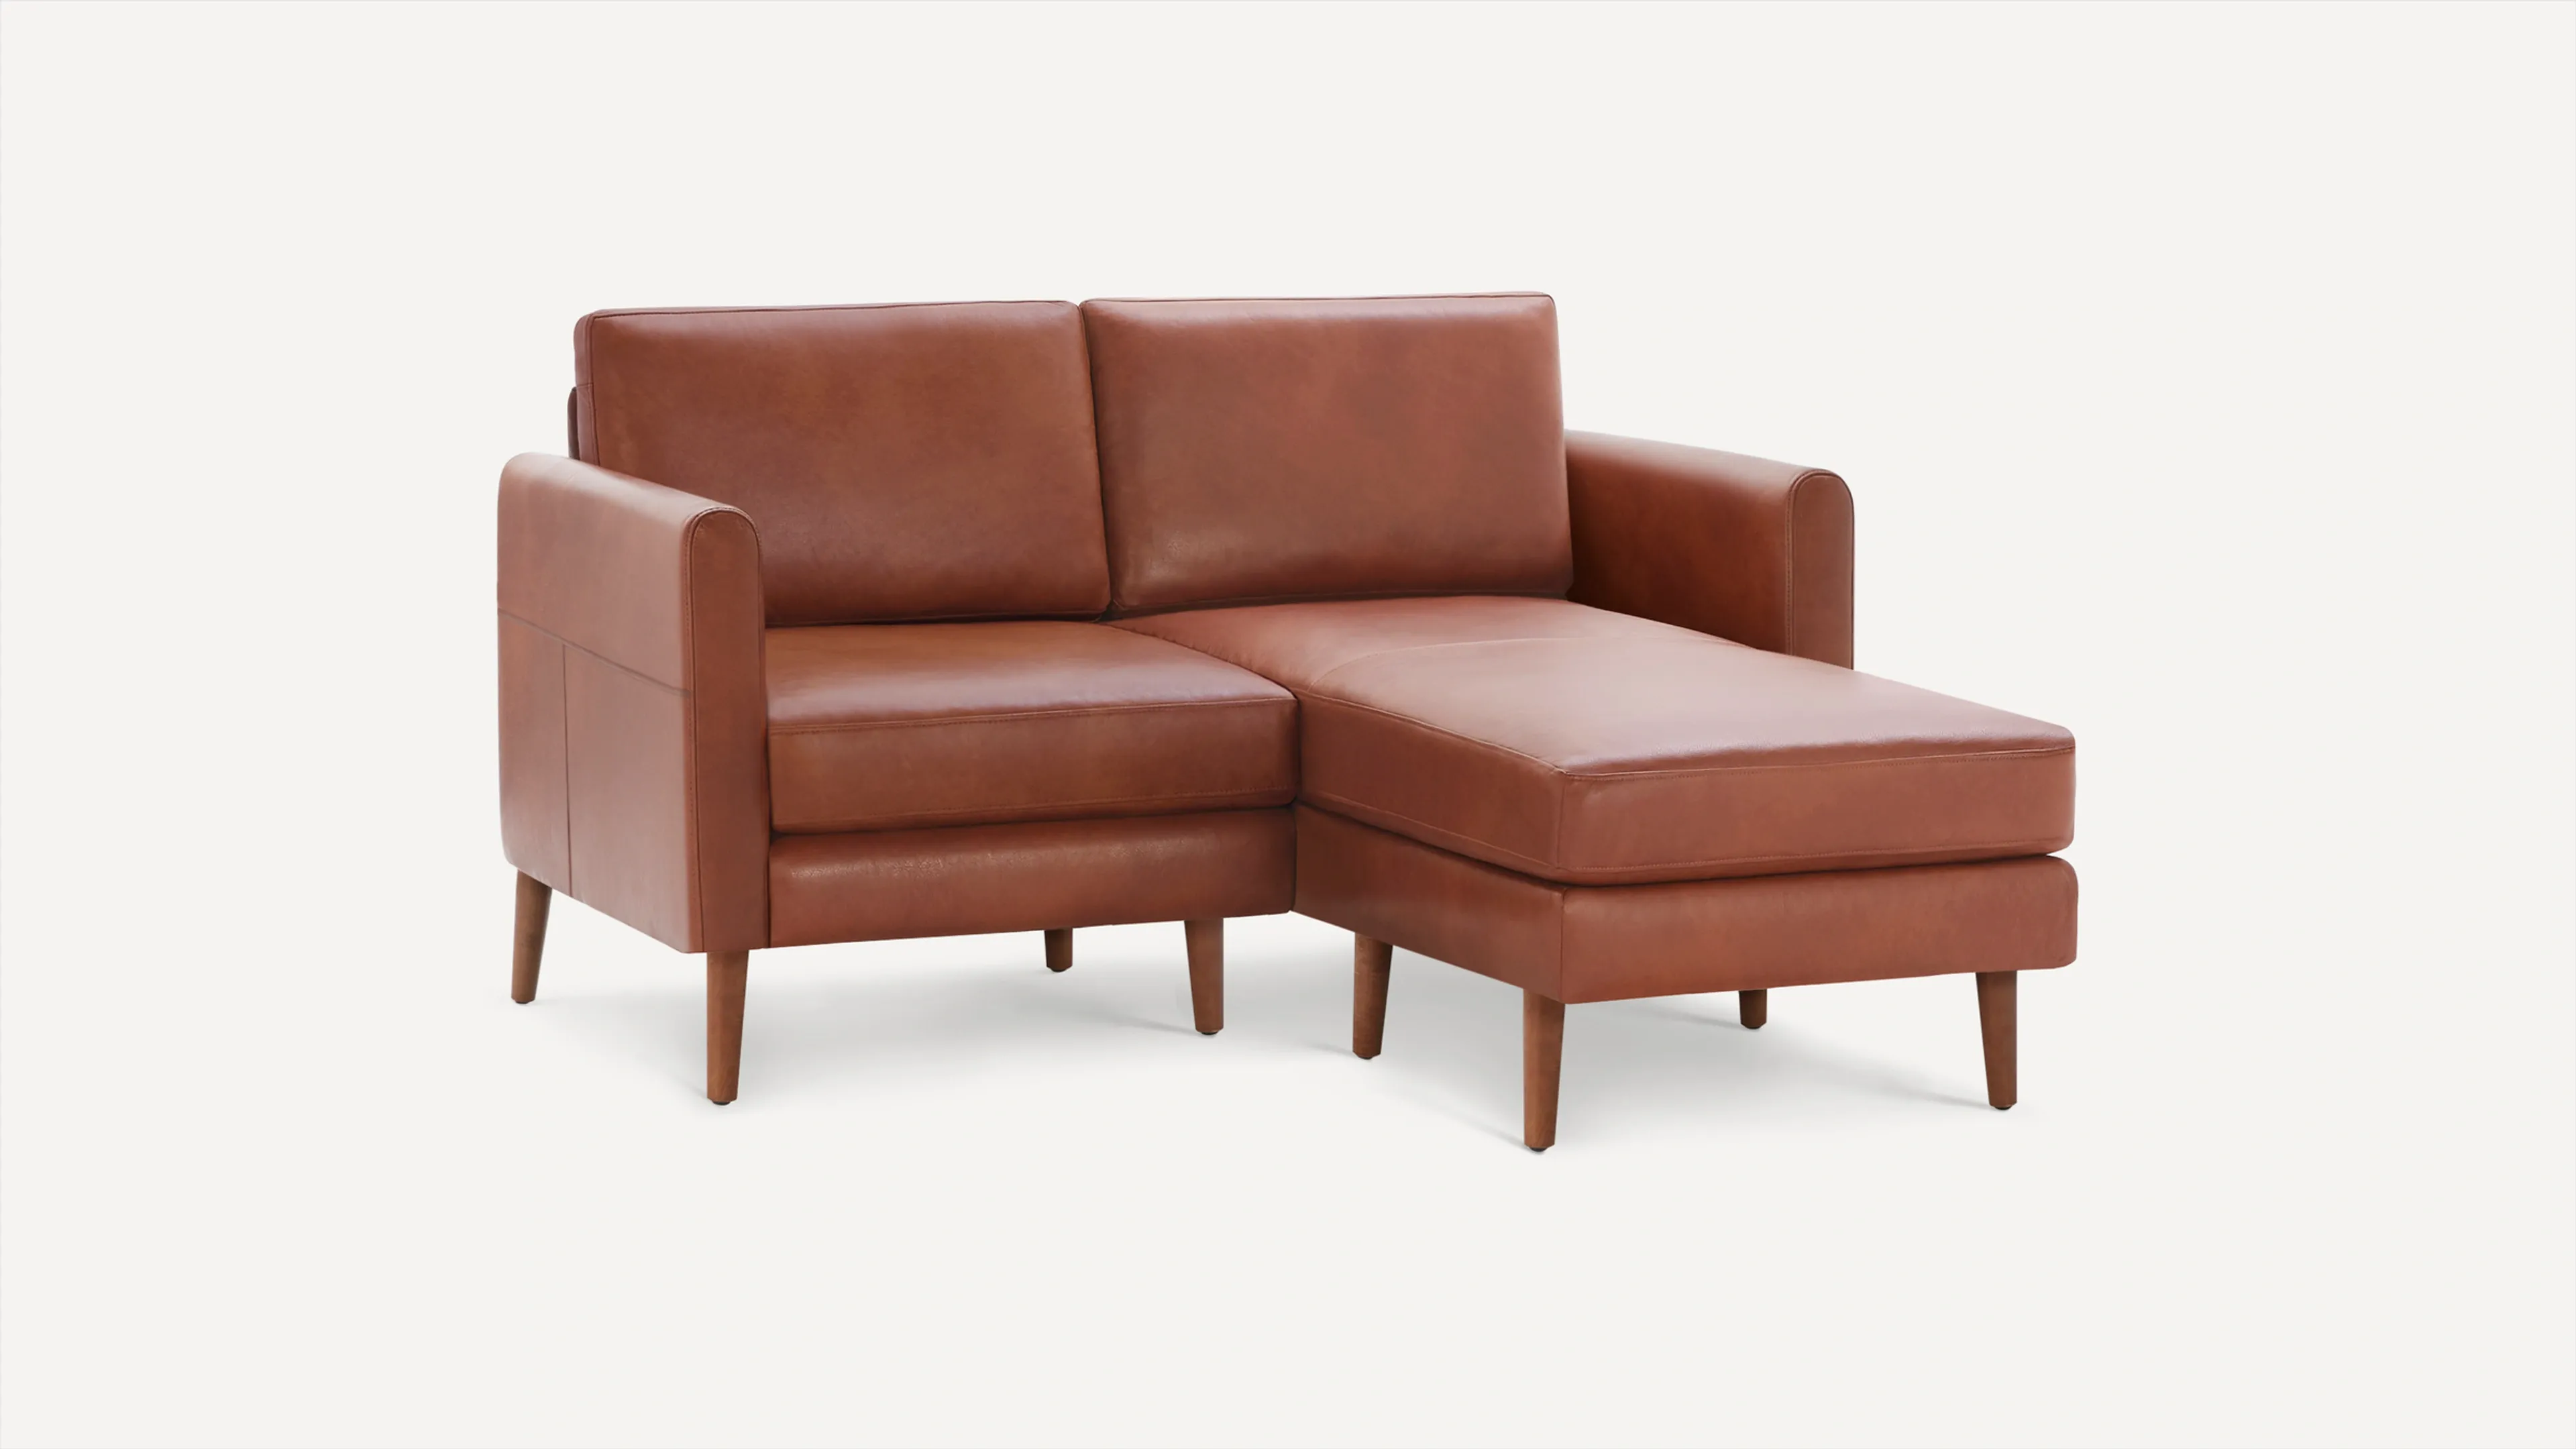 Original Nomad Chaise Loveseat in Chestnut Leather